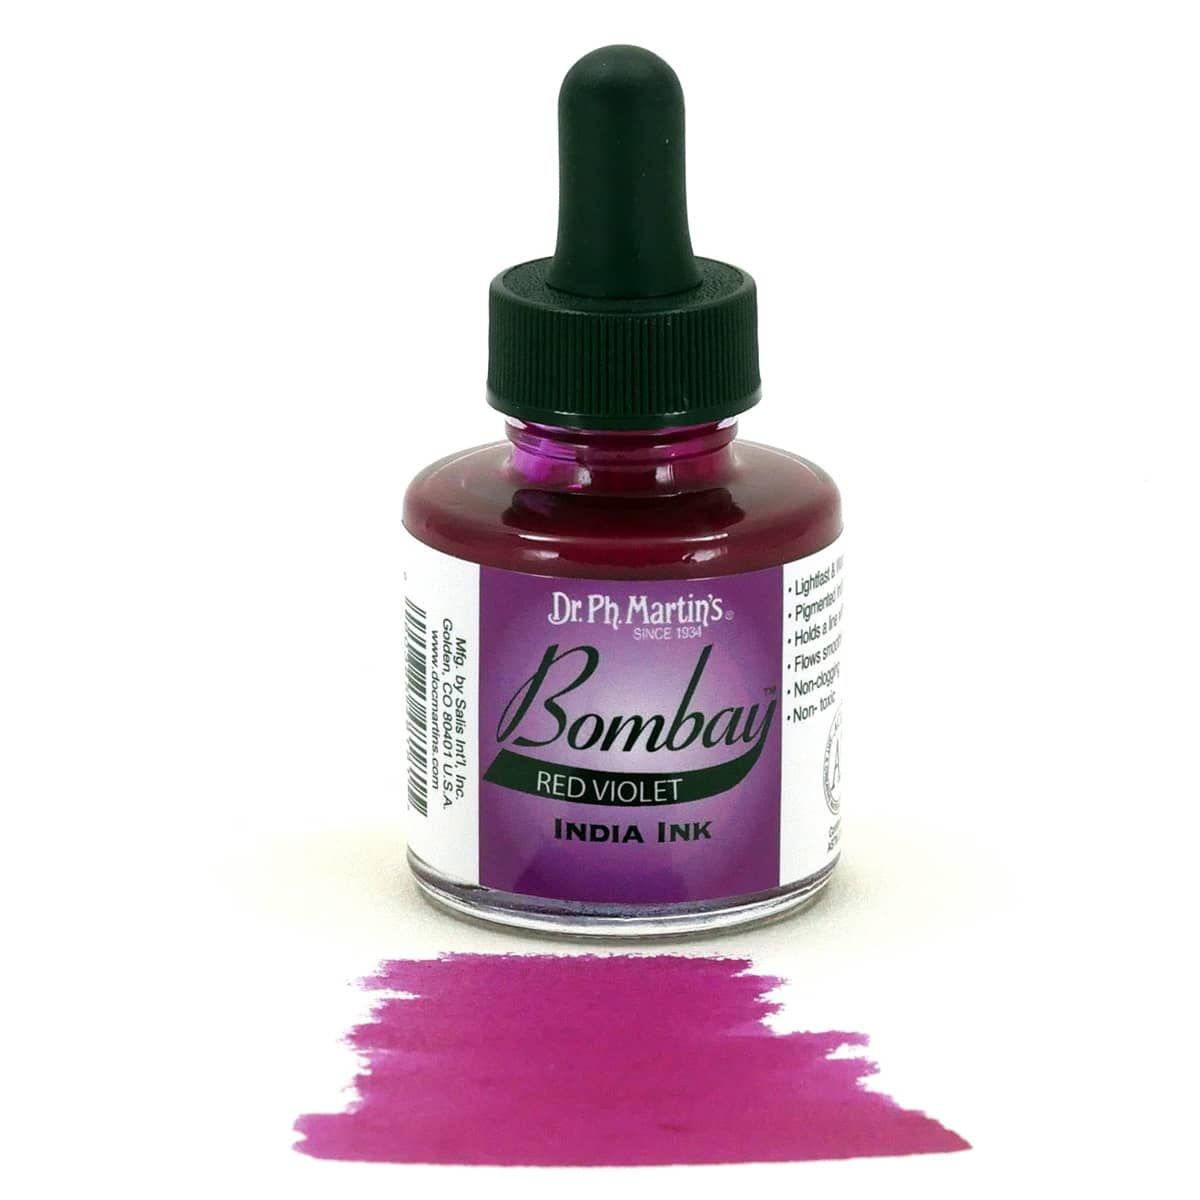 Dr. Ph. Martin's Bombay India Ink-Red Violet